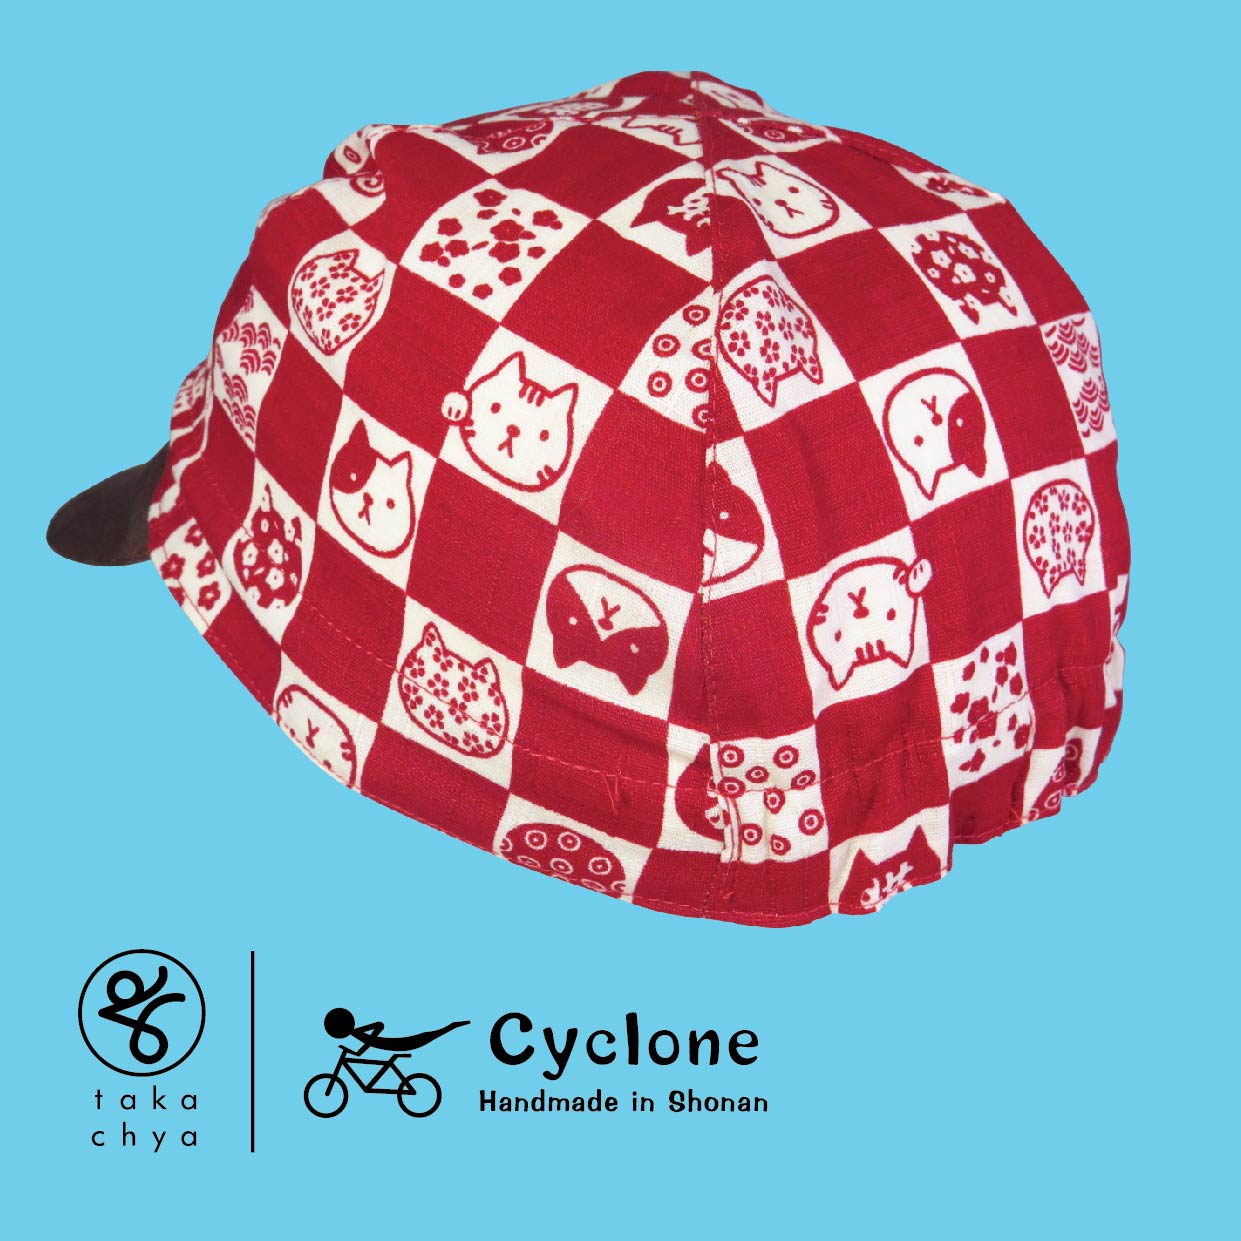 Red Cat - Cyclone Chee Japanese Handmade Cycling Cap